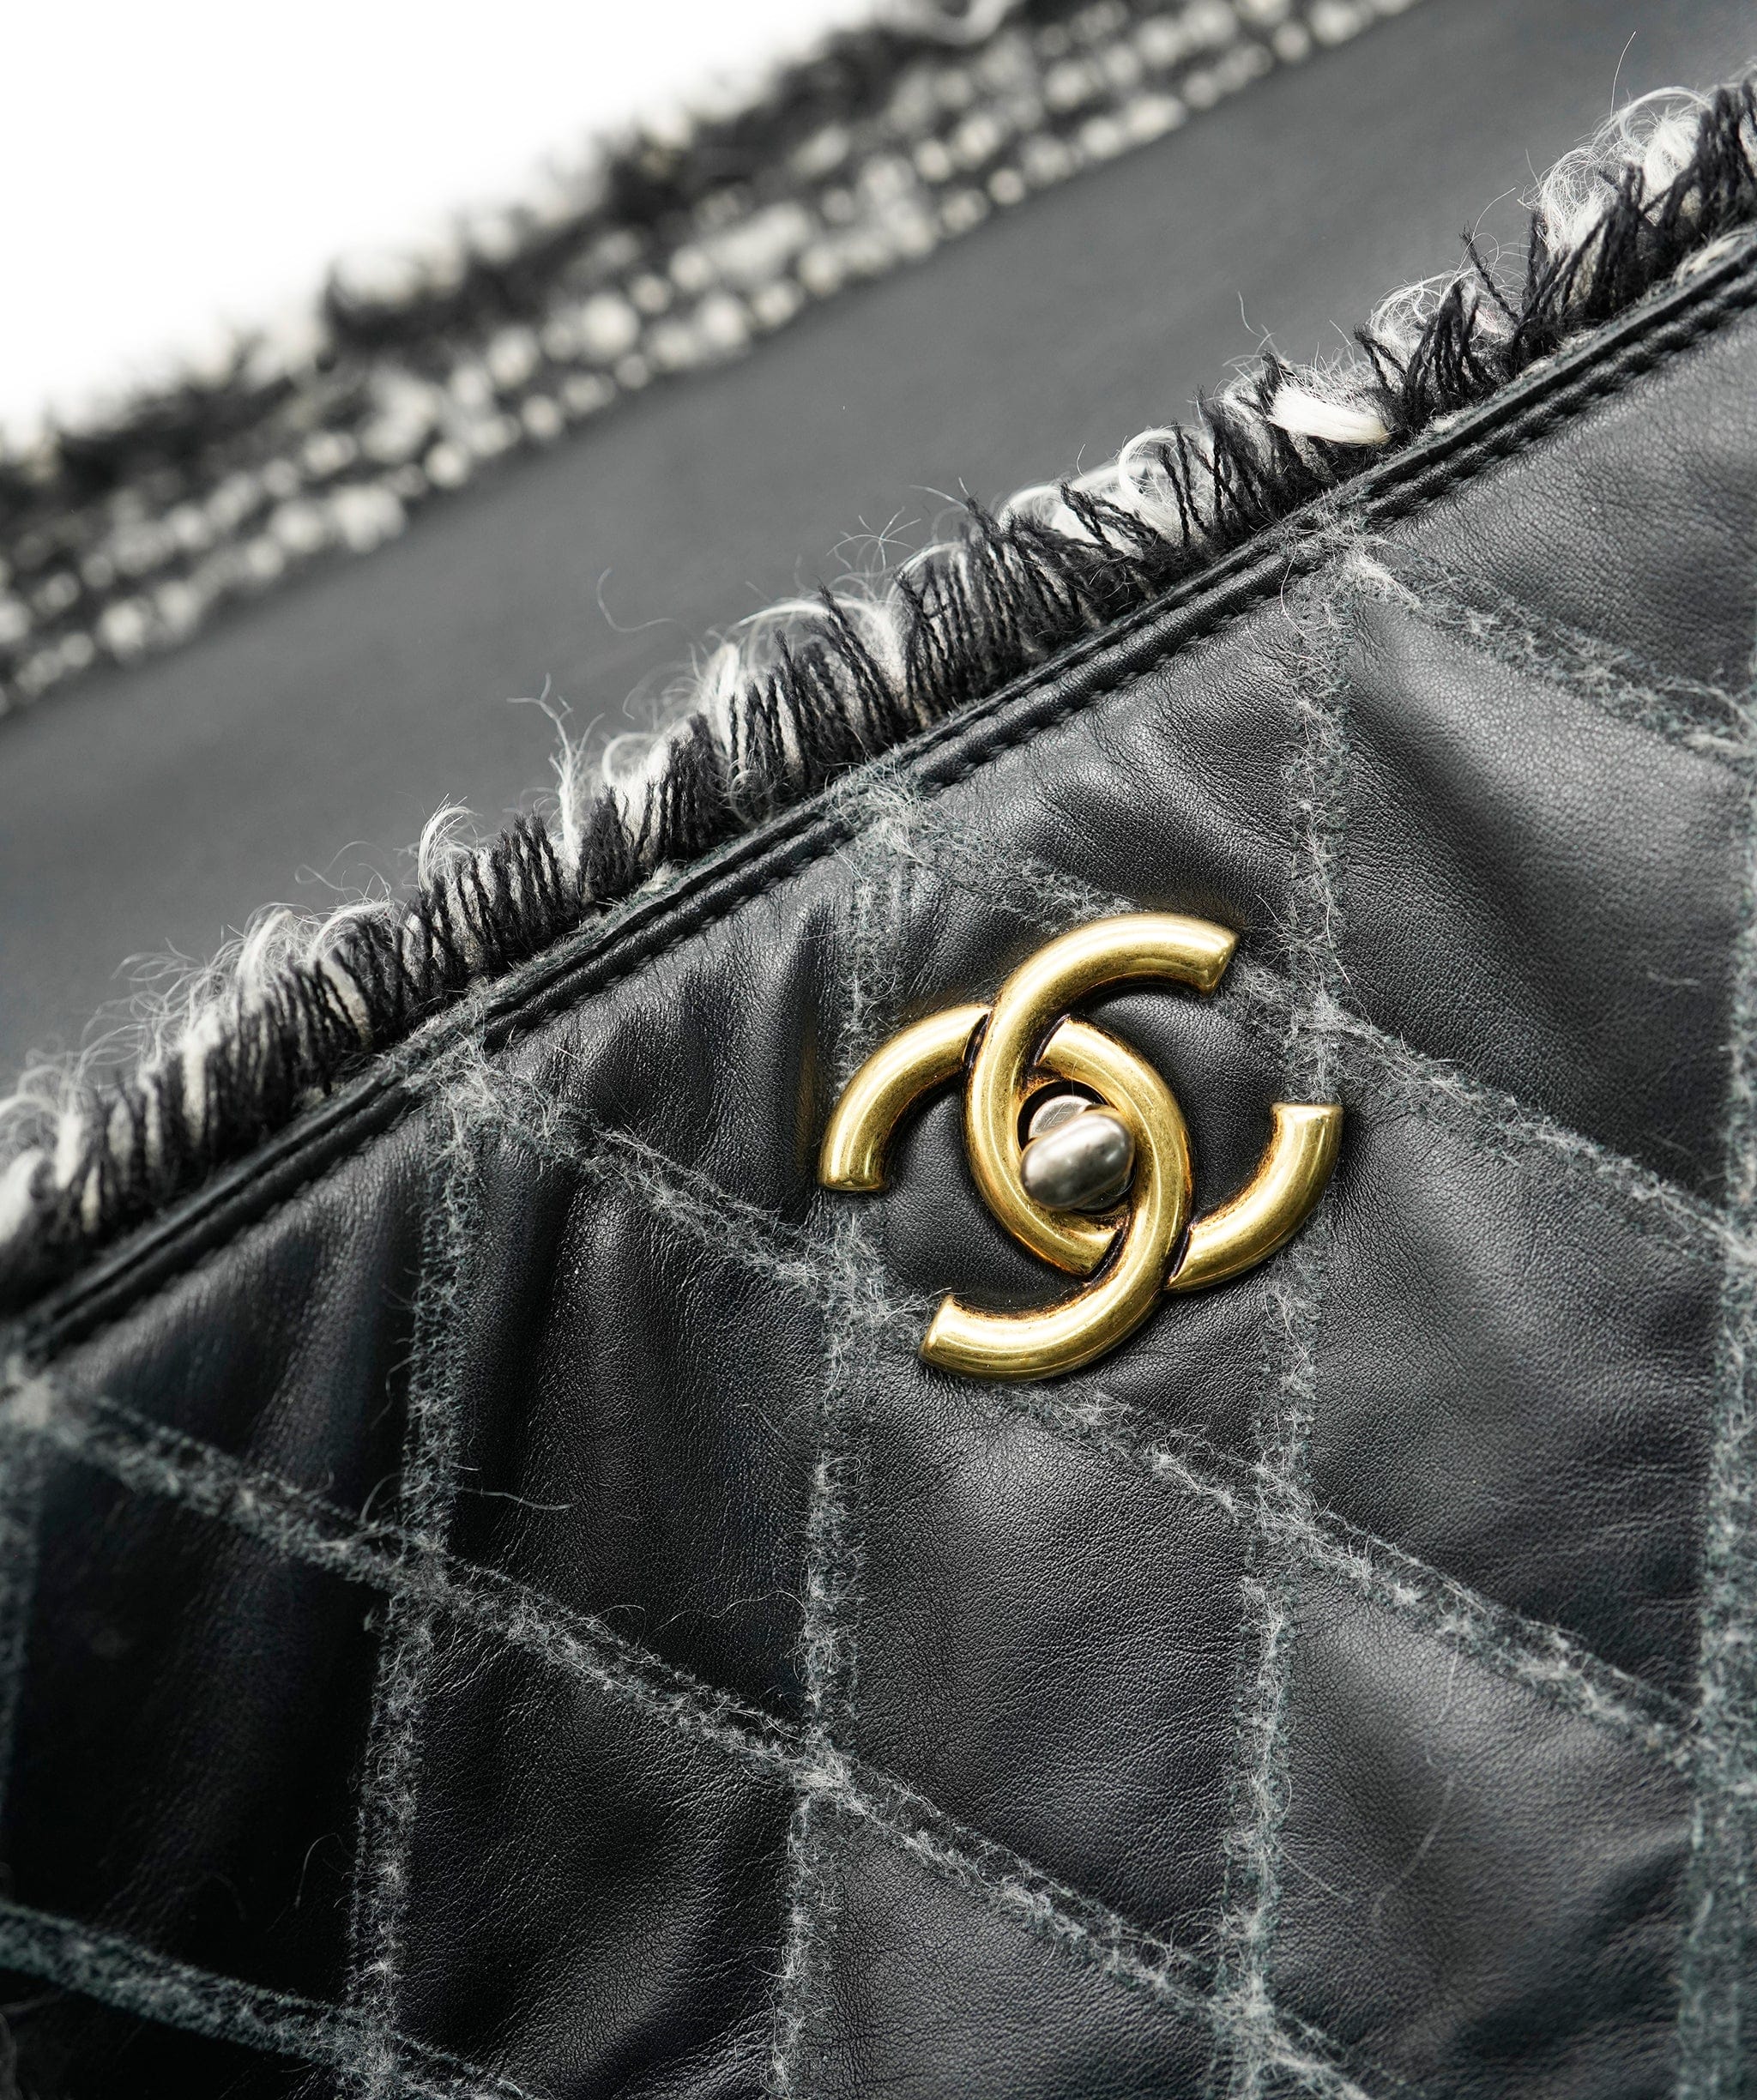 Chanel Chanel tote bag quilted leather and tweed AVC1959